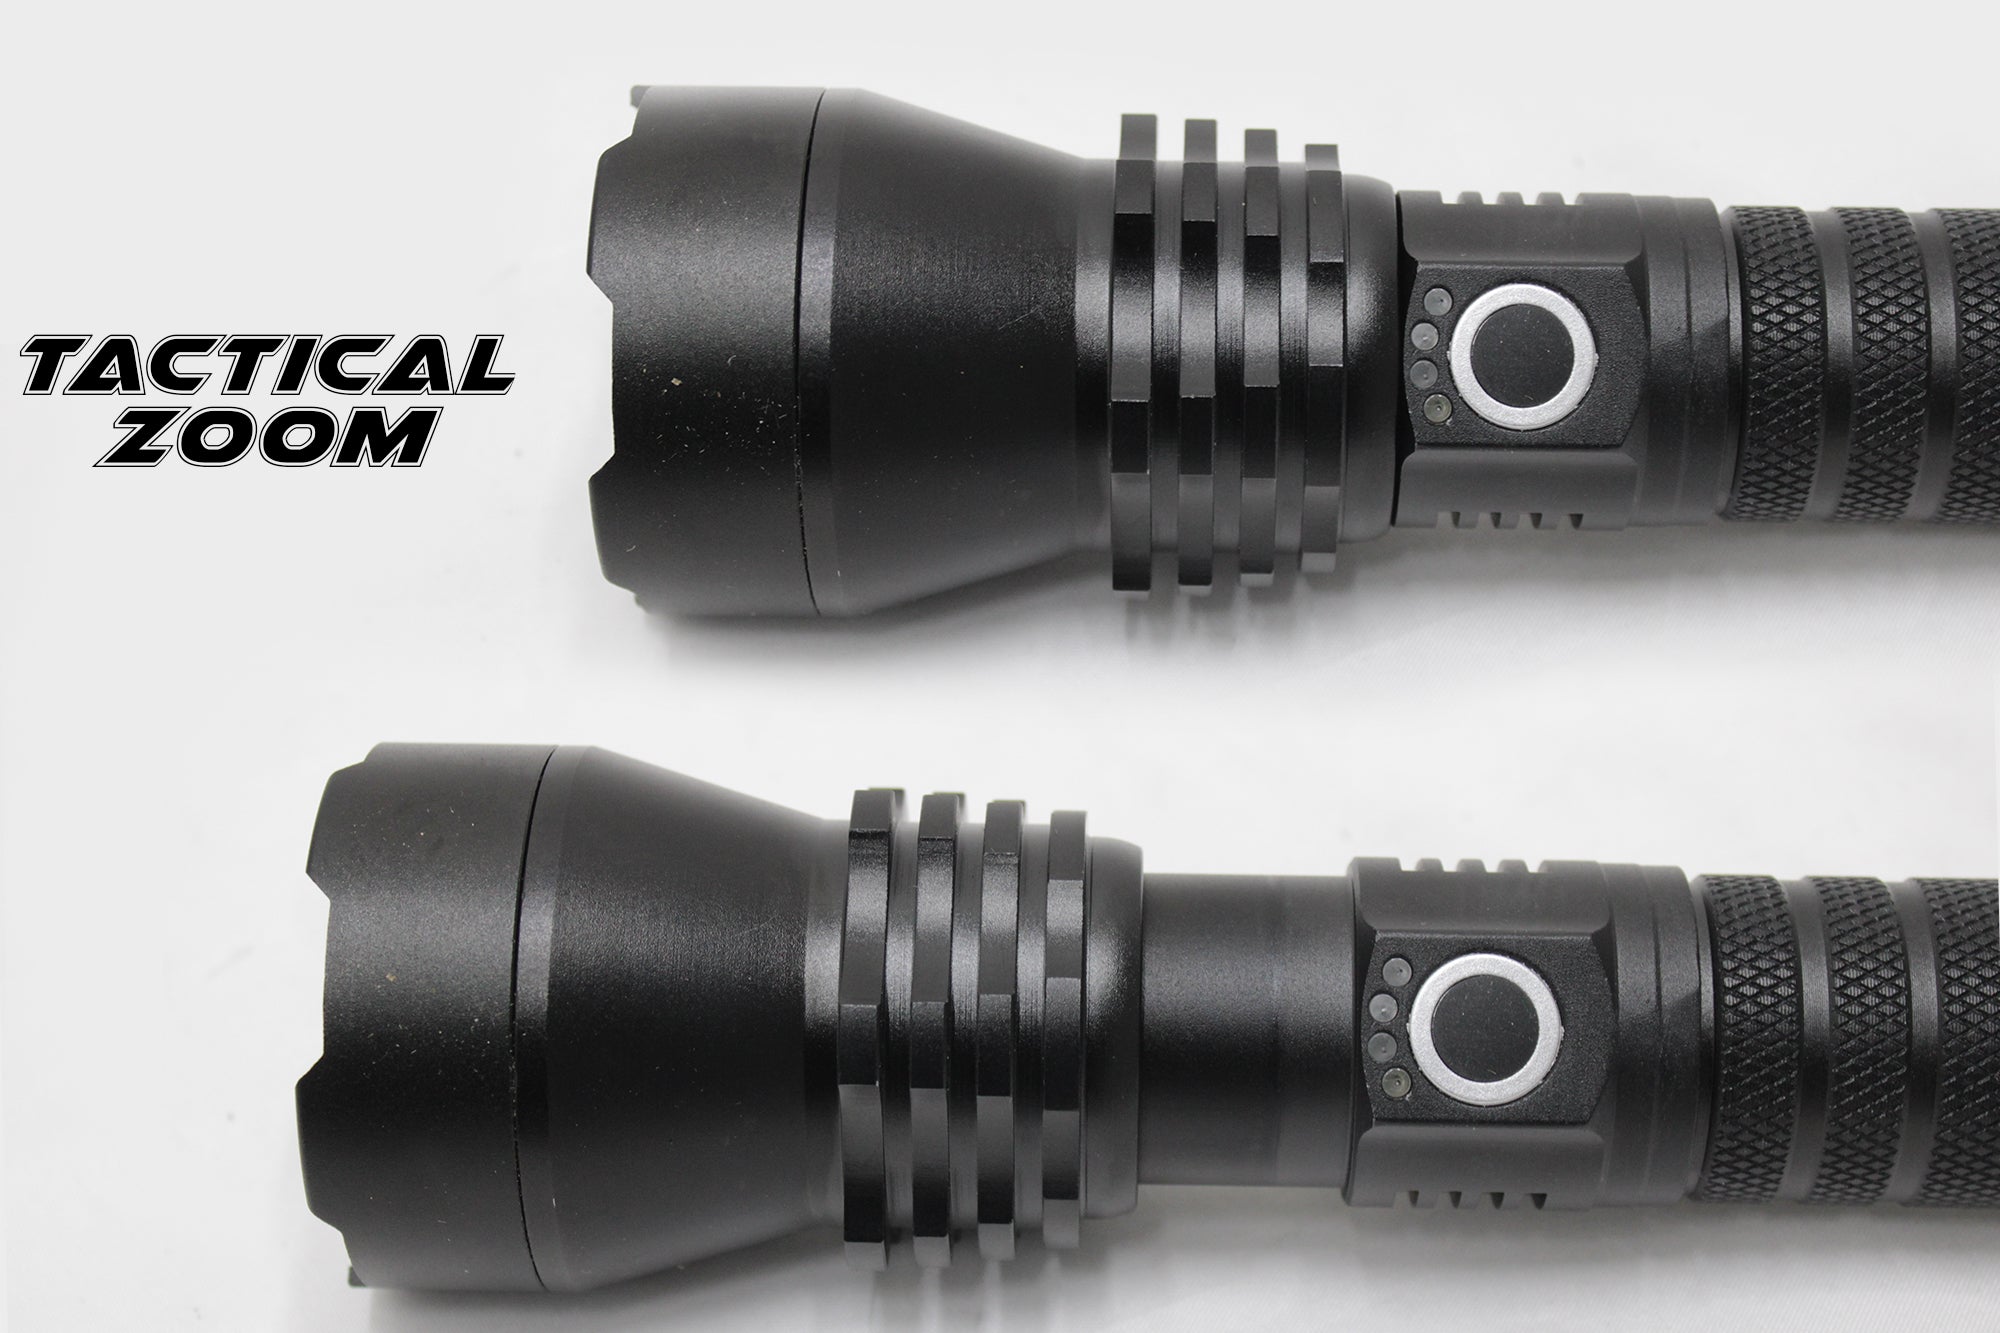 LMA - LED High Lumen Rechargeable Flashlight with Strap - Black